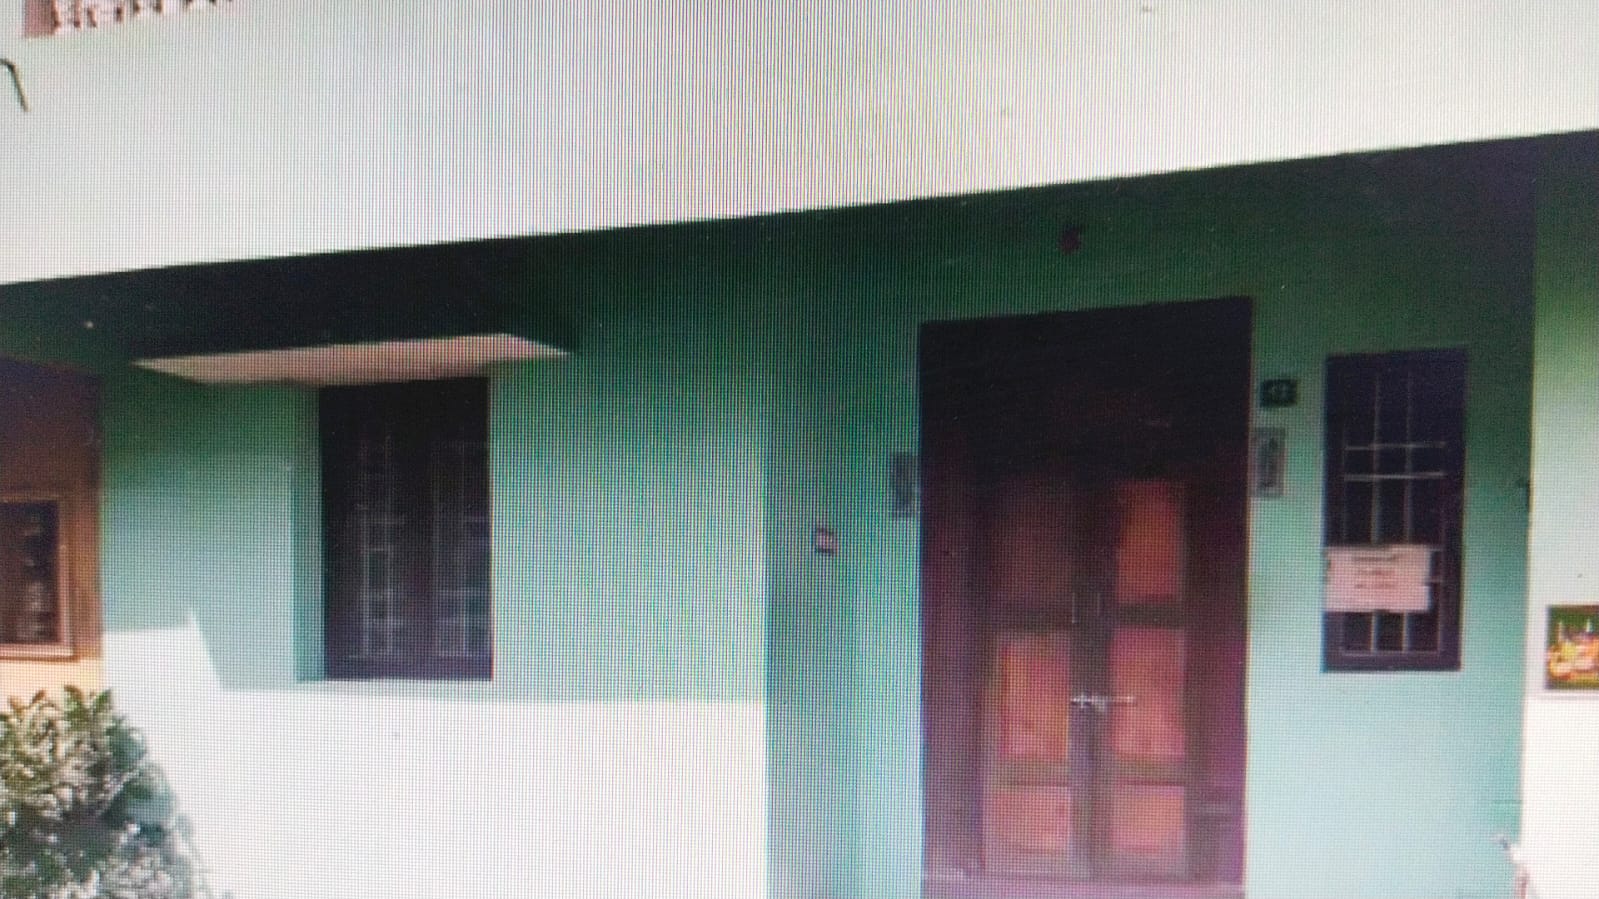 9709-for-sale-3BHK-Residential-Independent-House-Rs-4500000-in-Pondicherry-Town-Pondicherry-City-Puducherry